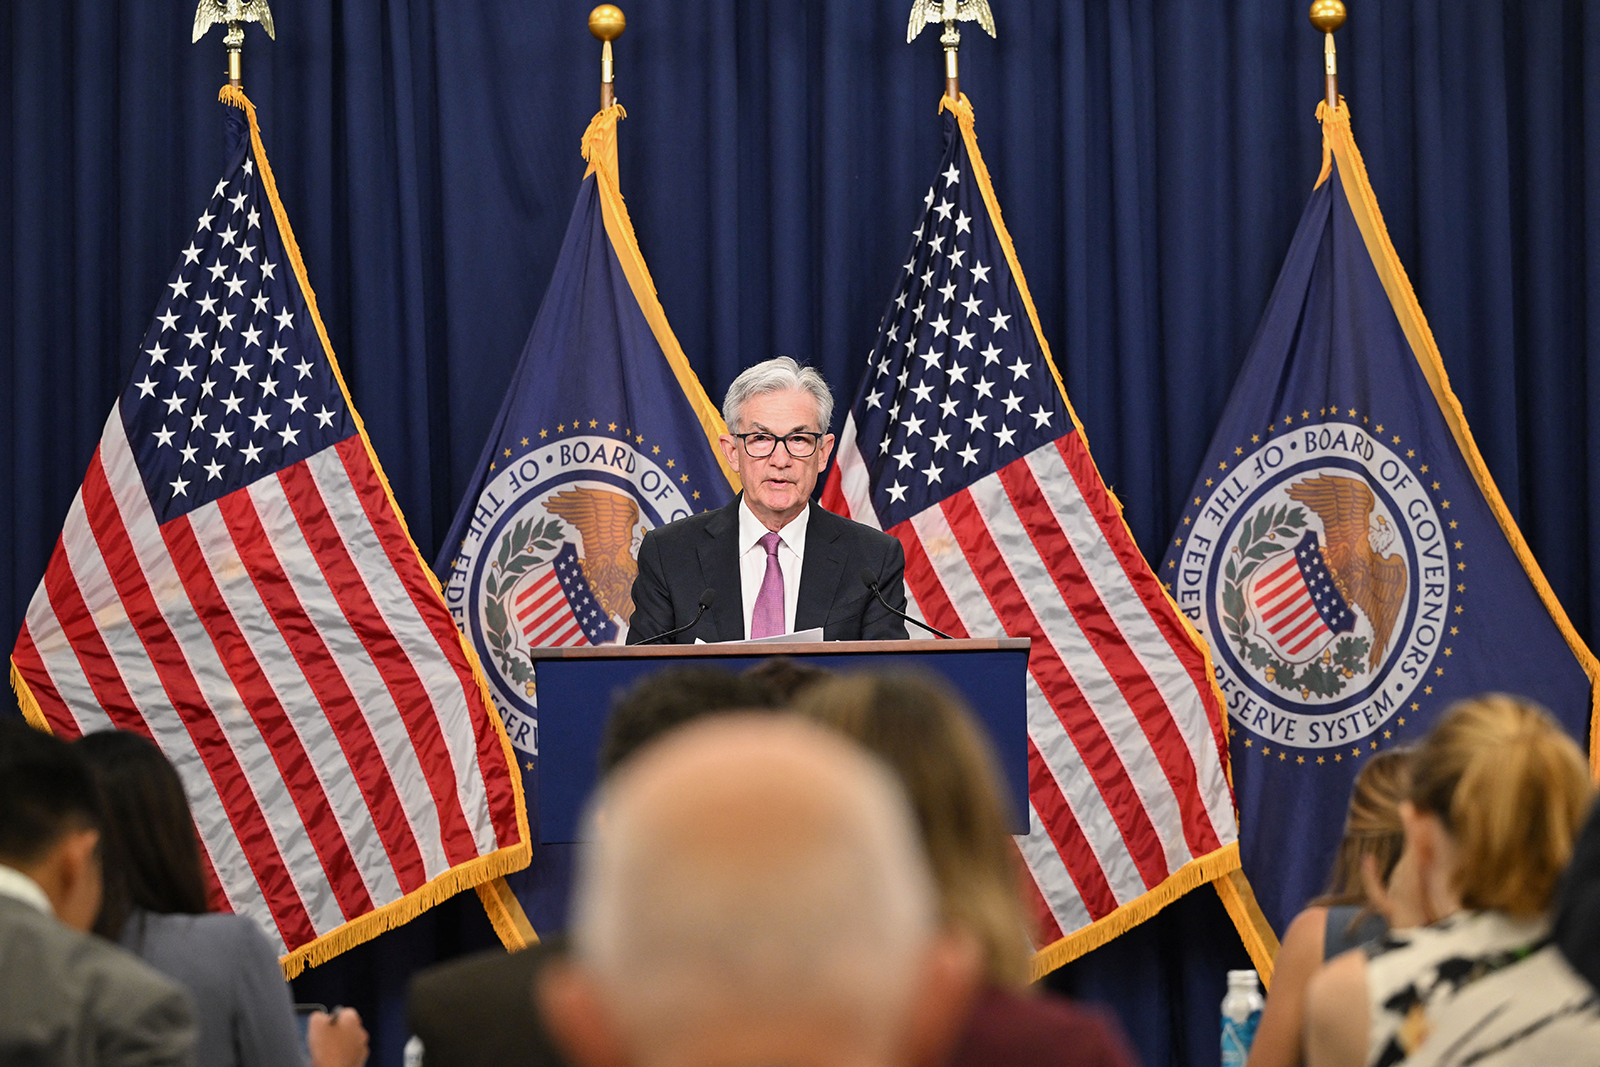 Federal Reserve Board Chairman Jerome Powell speaks during a news conference in Washington, DC, on July 27.